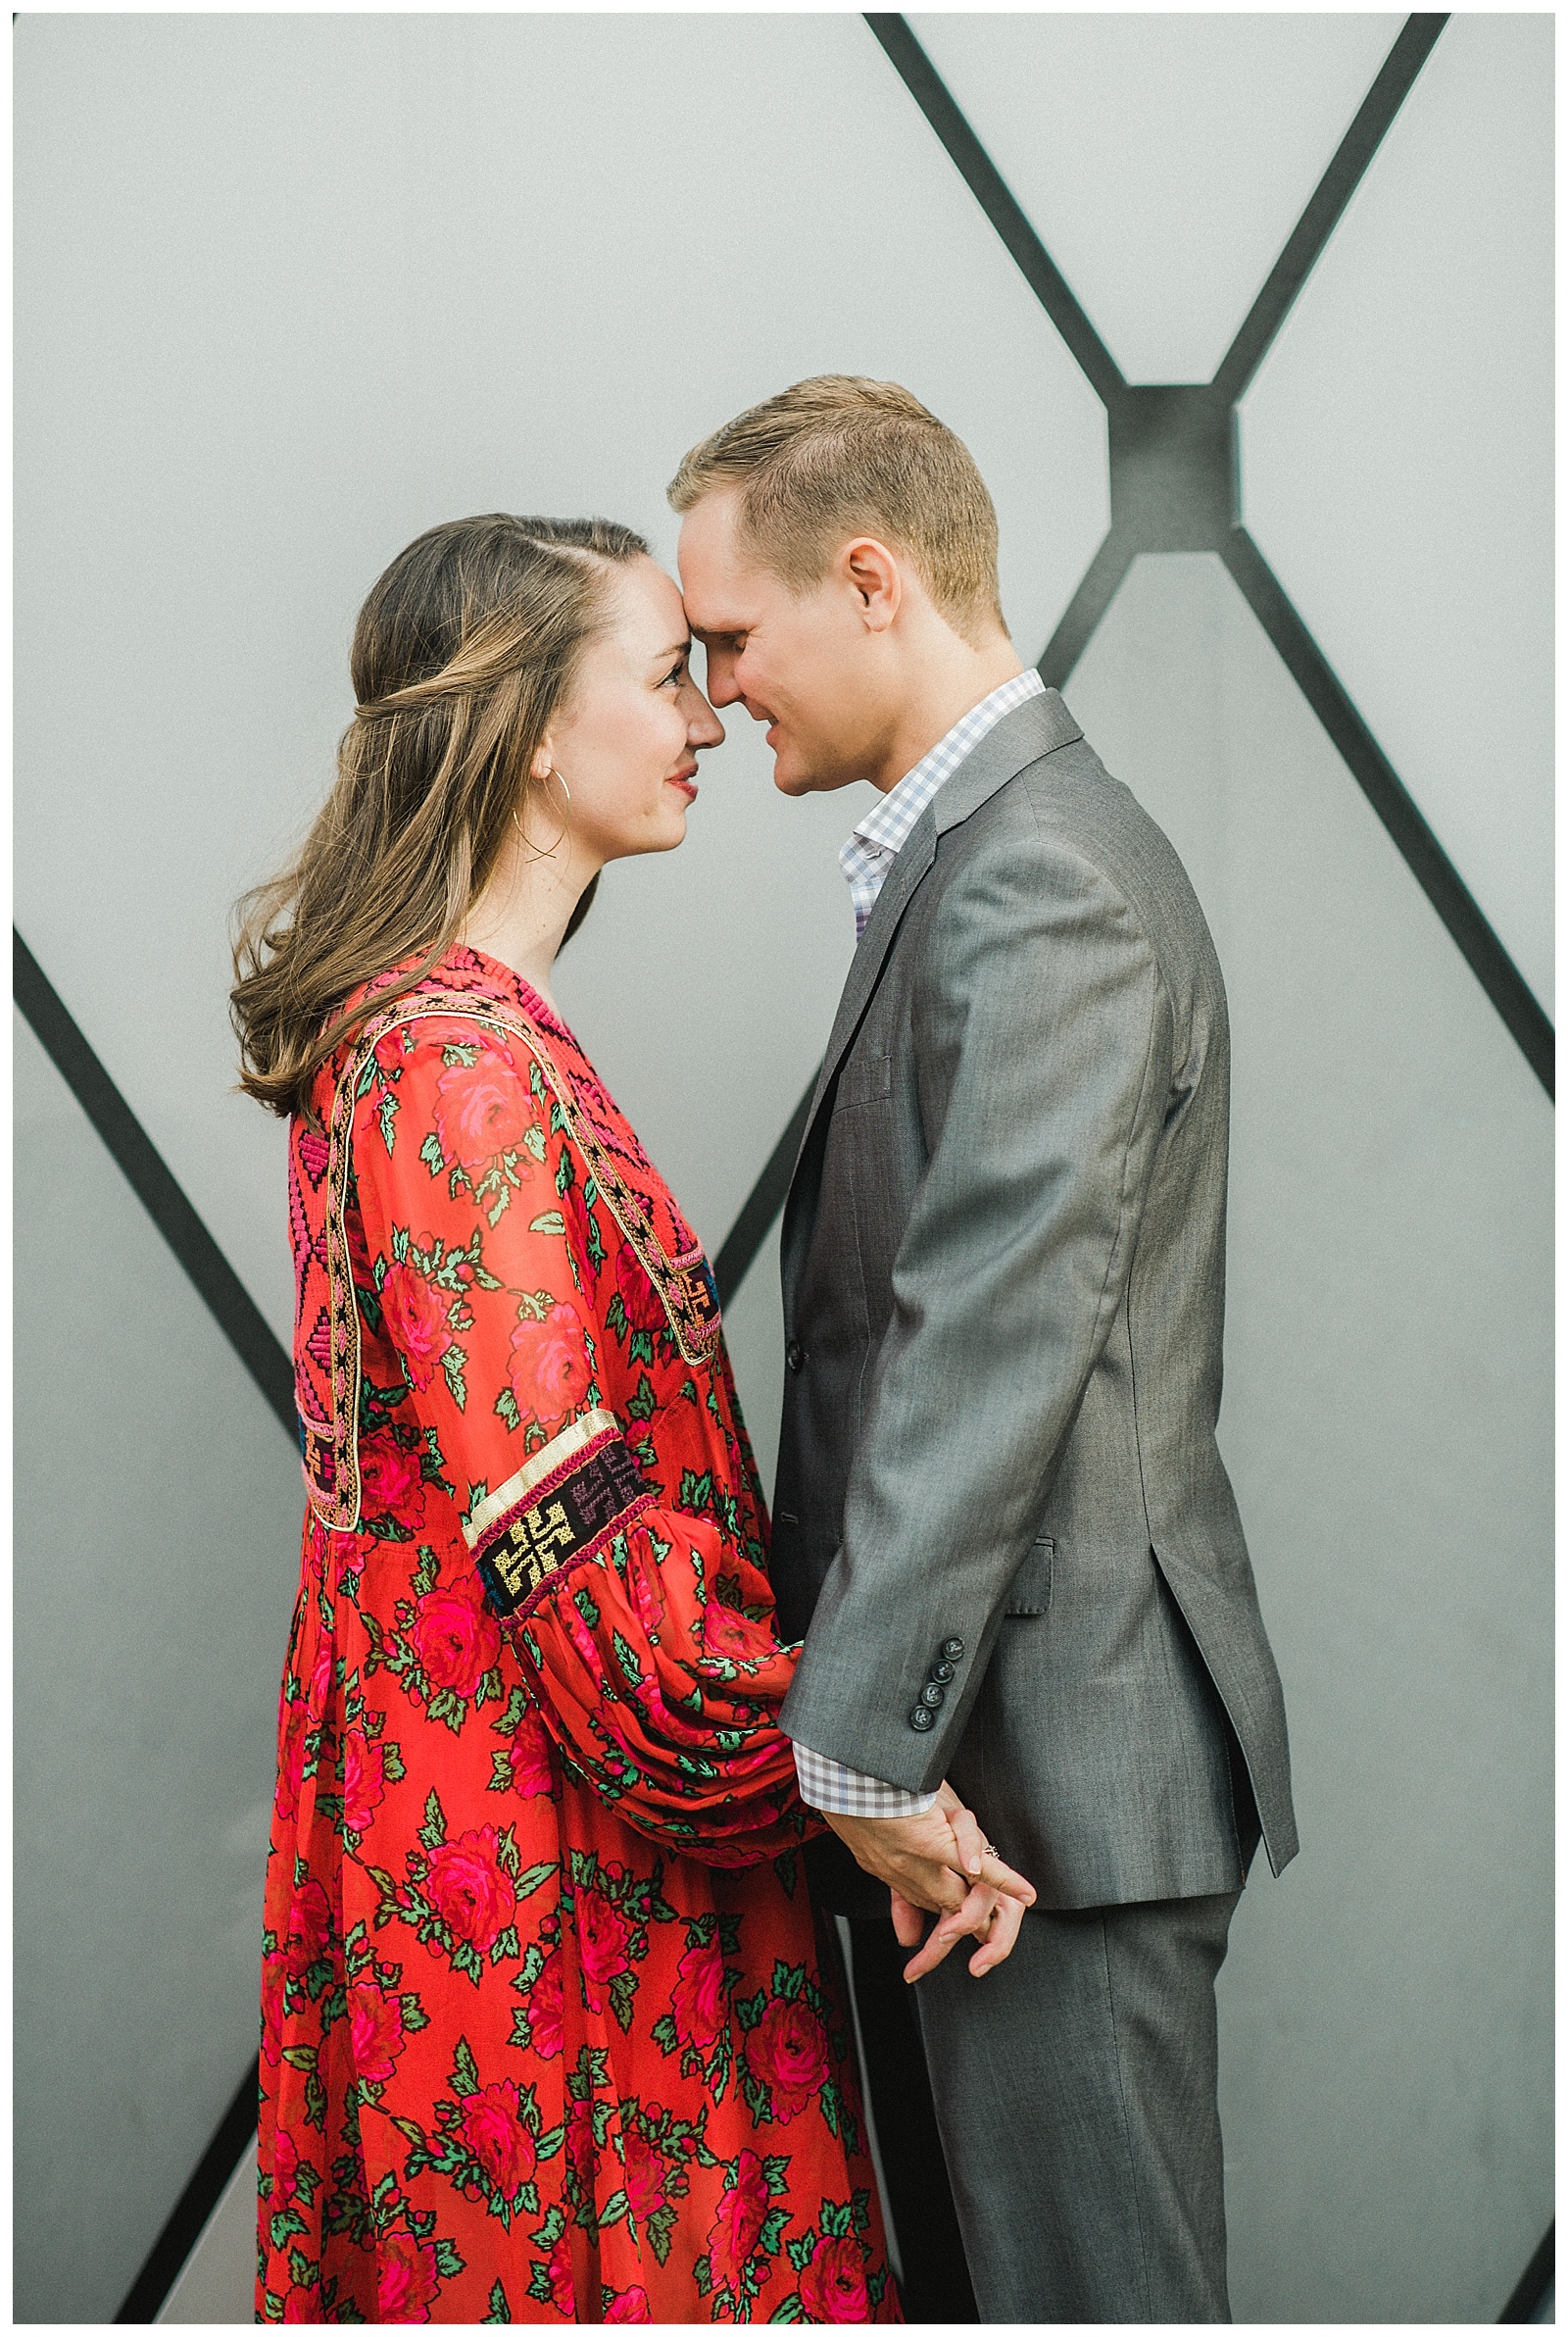 dallas_arts_district_white_rock_lakeengagement_sessionCourtney+Andy13.jpg